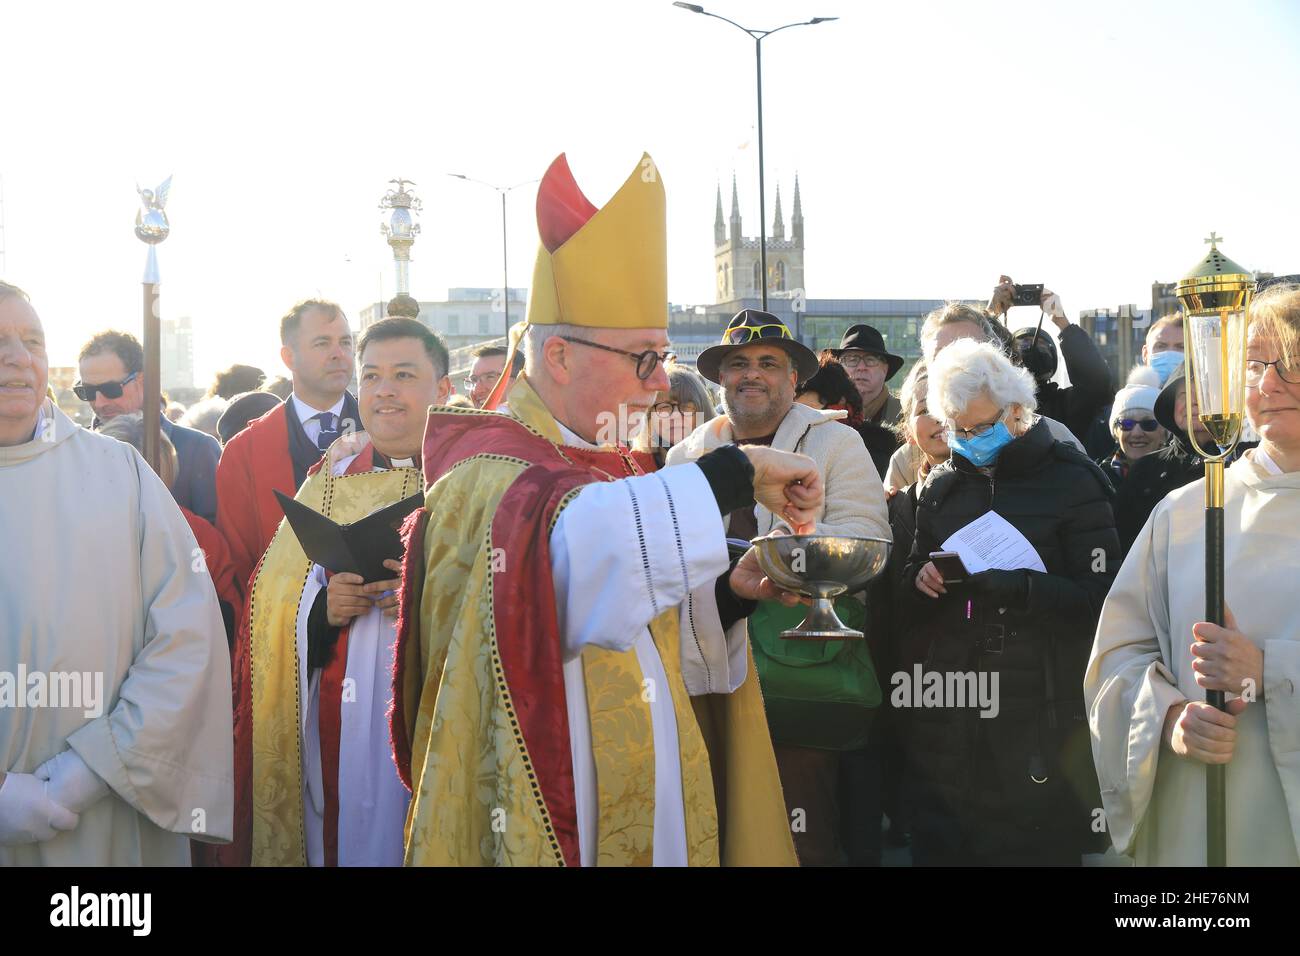 London, UK, January 9th 2022. The Bishop of Southwark Cathedral joined clergy and congregation from St Magnus the Martyr church in a service blessing the Thames and all those who use London's great river. This year they were lucky to have beautiful sunny weather. Monica Wells/Alamy Live News Stock Photo